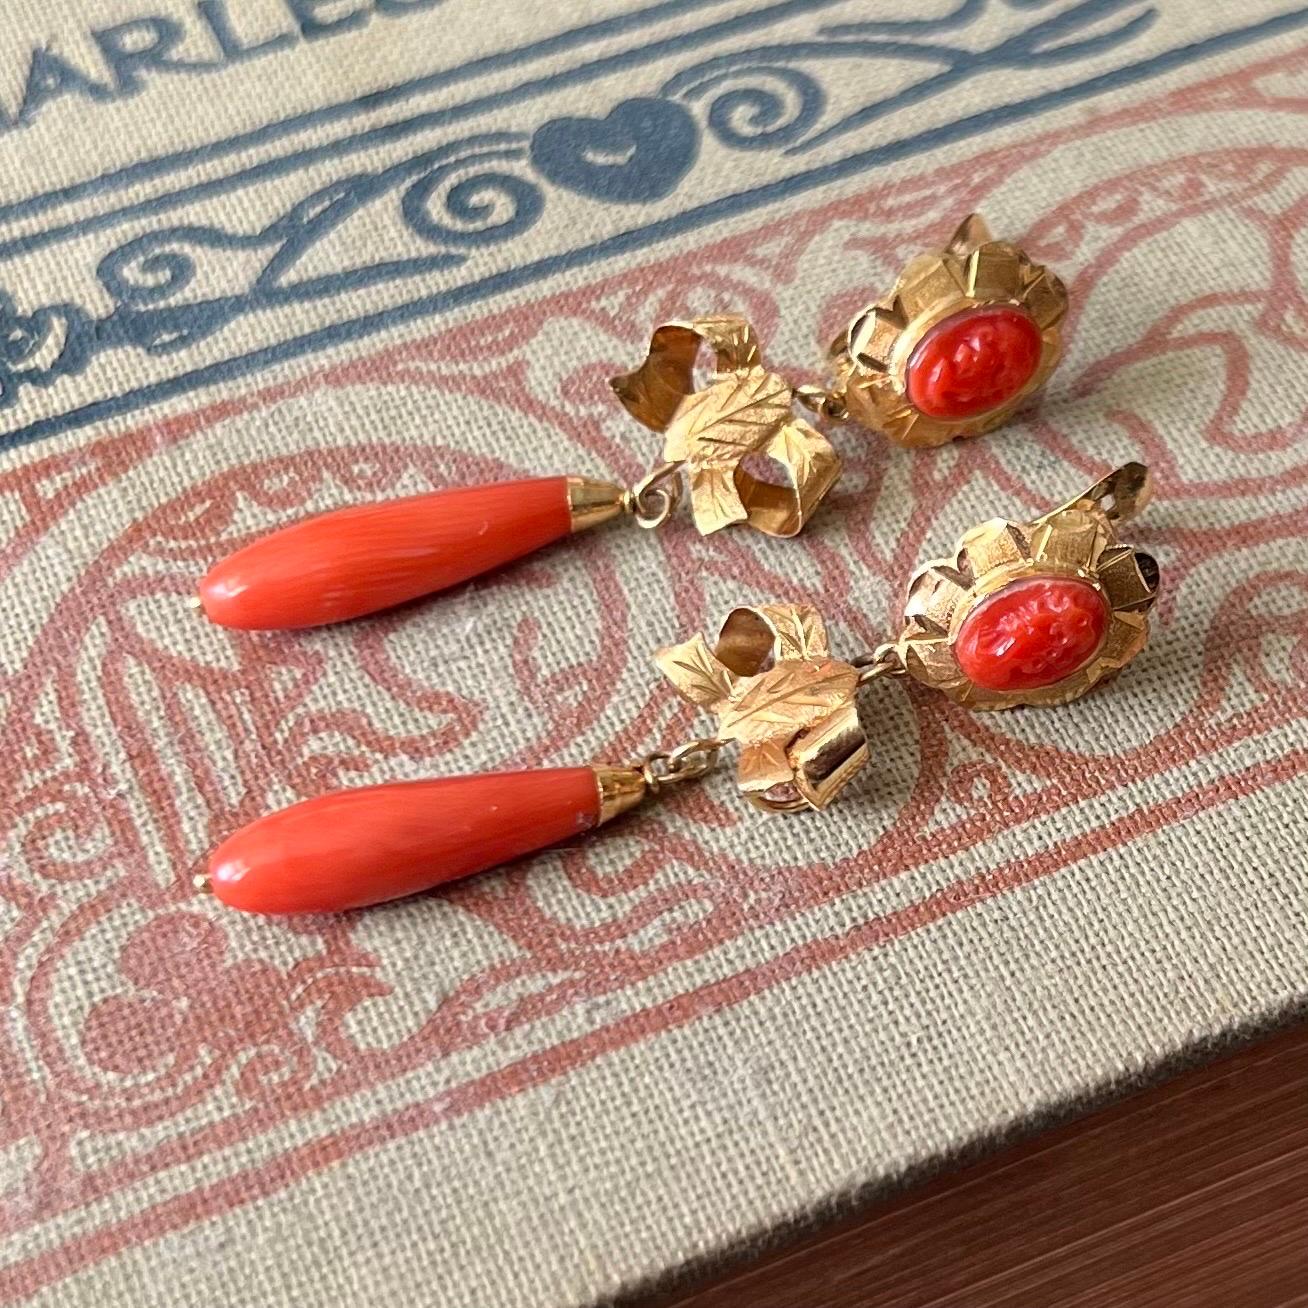 A fine and impressive pair of vintage coral and 18 karat yellow gold drop earrings. Each articulated earring features a signature torpedo-shaped coral drop. The coral drop is crowned with a yellow gold bow and hangs from an oval-shaped engraved